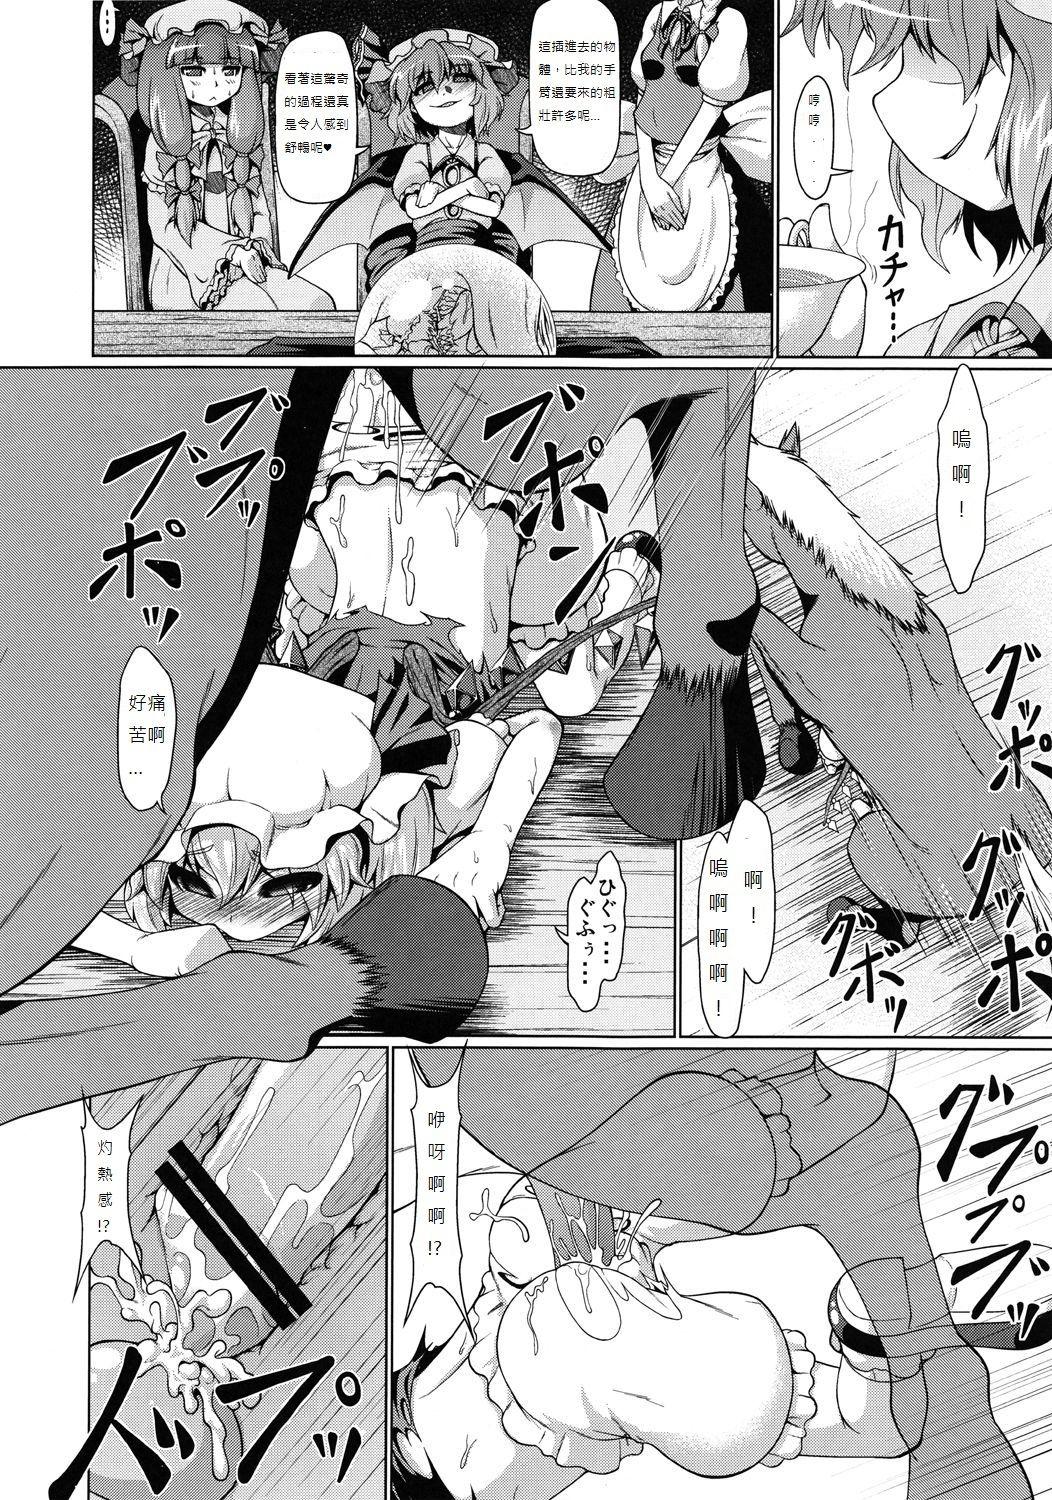 Fucking Hard Horse vs Flan - Touhou project Sola - Page 5